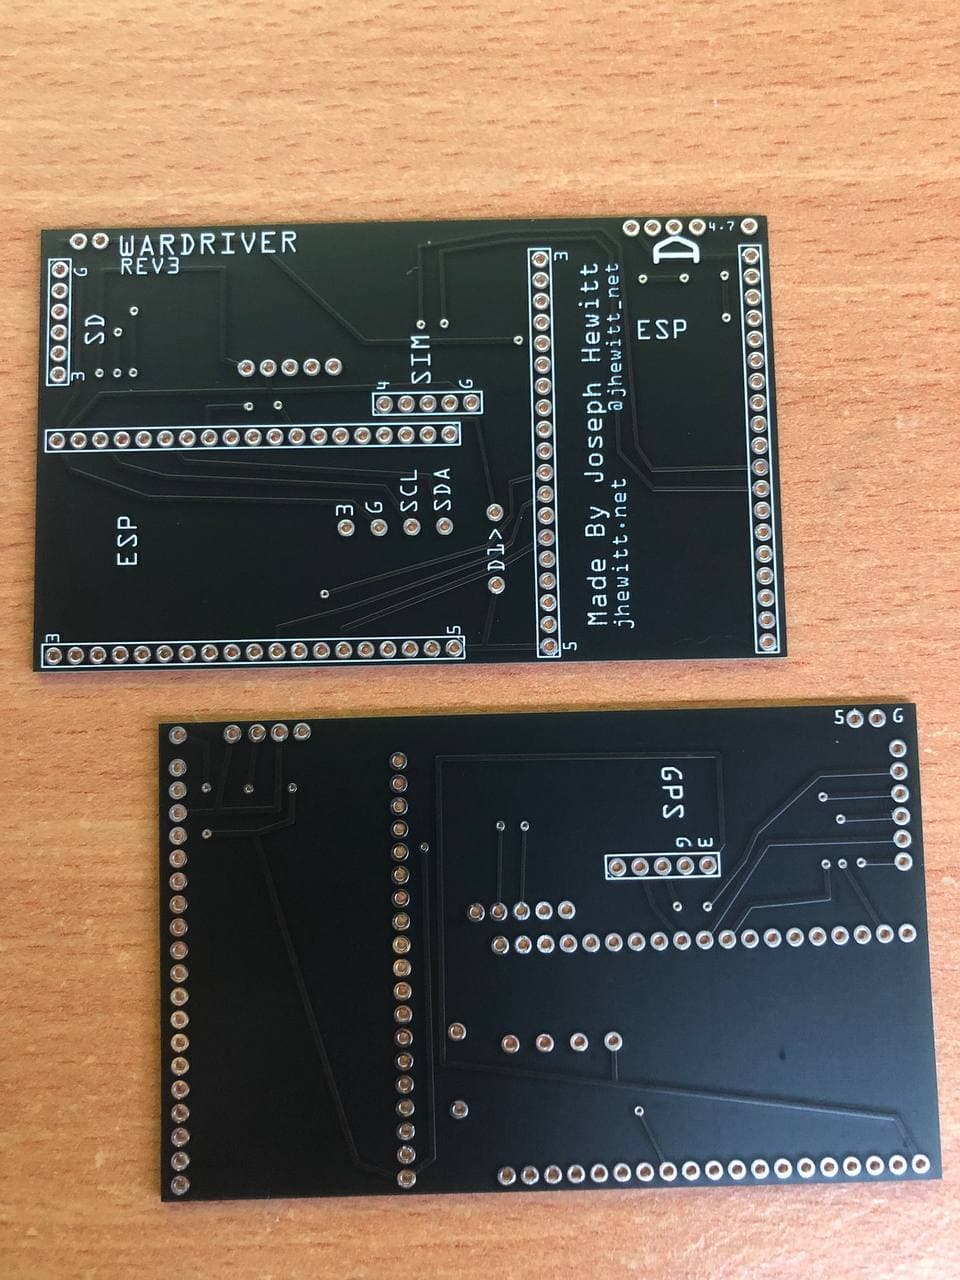 Wardriver rev3 PCB, front and back